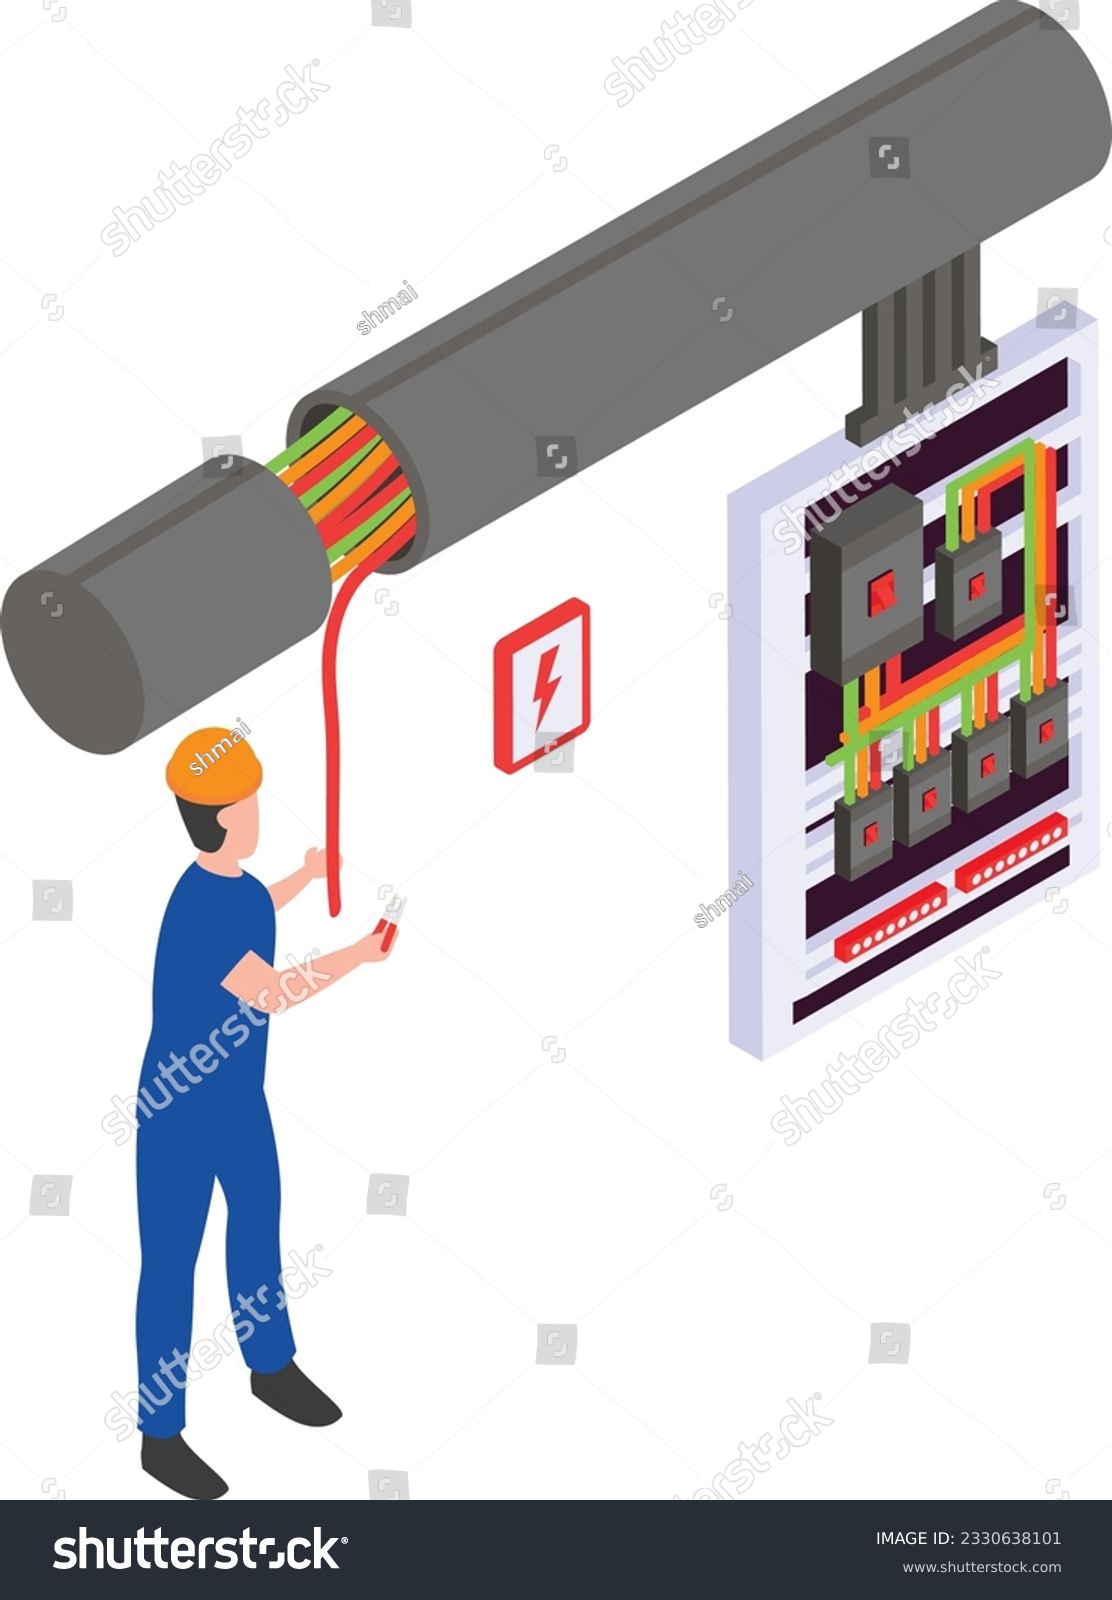 SVG of Metal-Clad High Voltage Switchgear Cabinet isometric Concept Power Distribution Panel Board vector icon design, Electrical engineer symbol, Wiring specialist Sign, maintenance technician tools stock svg